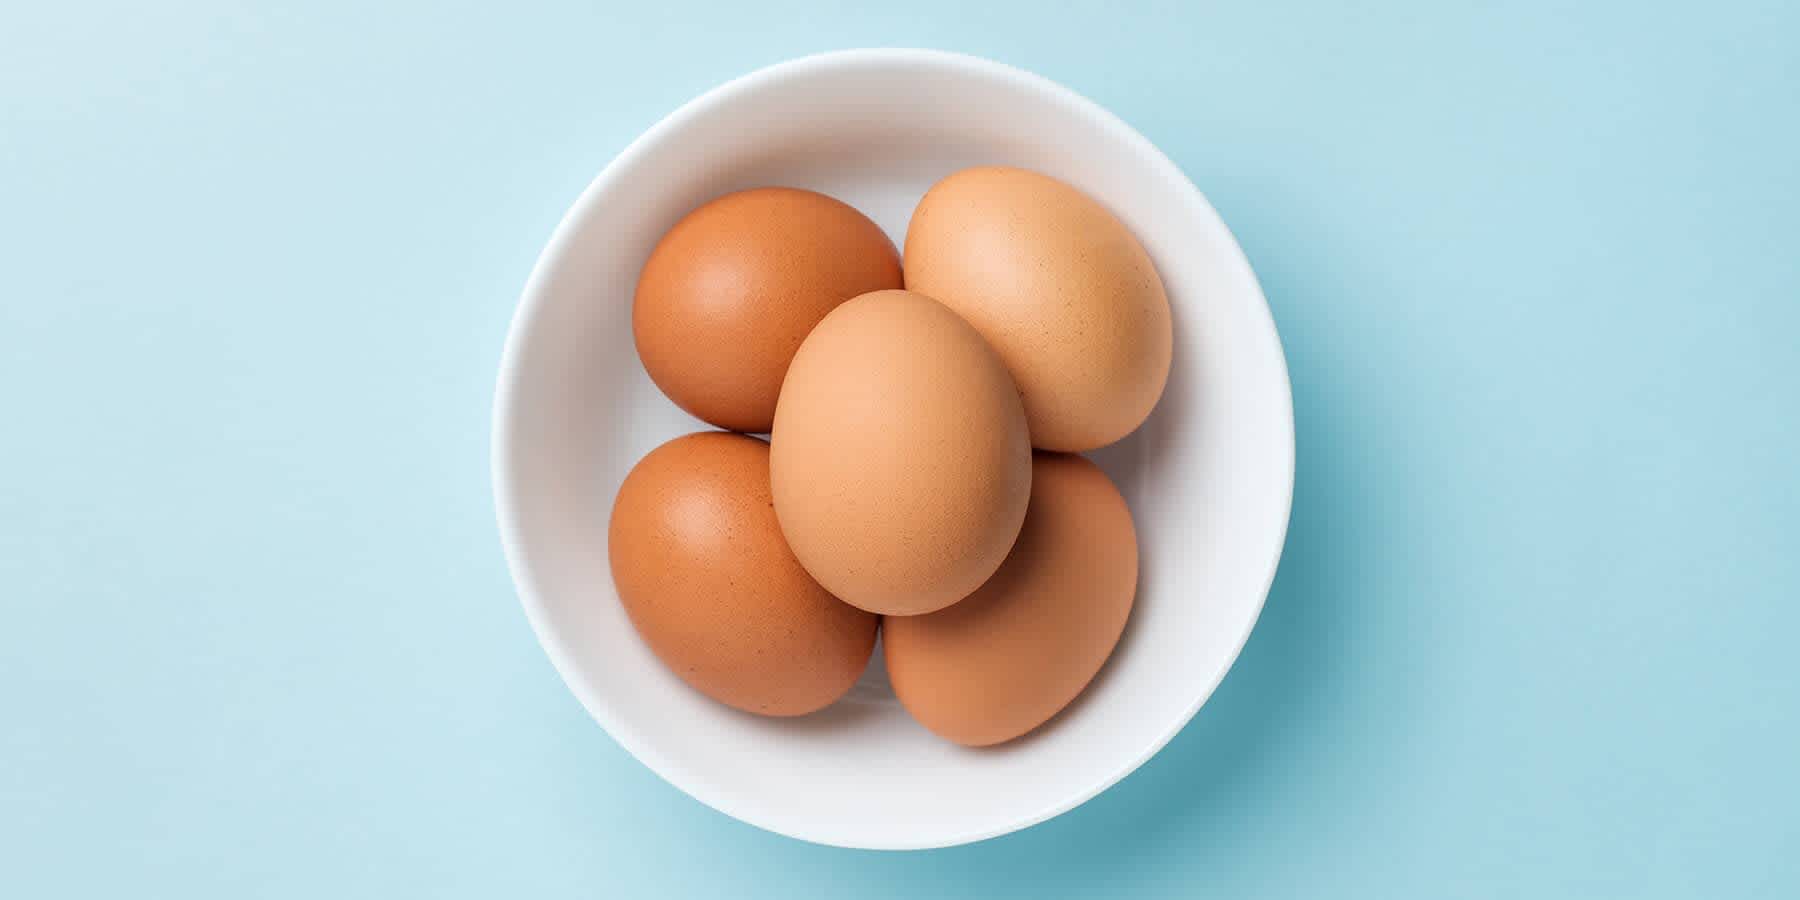 Bowl of eggs as an example of food with cholesterol 